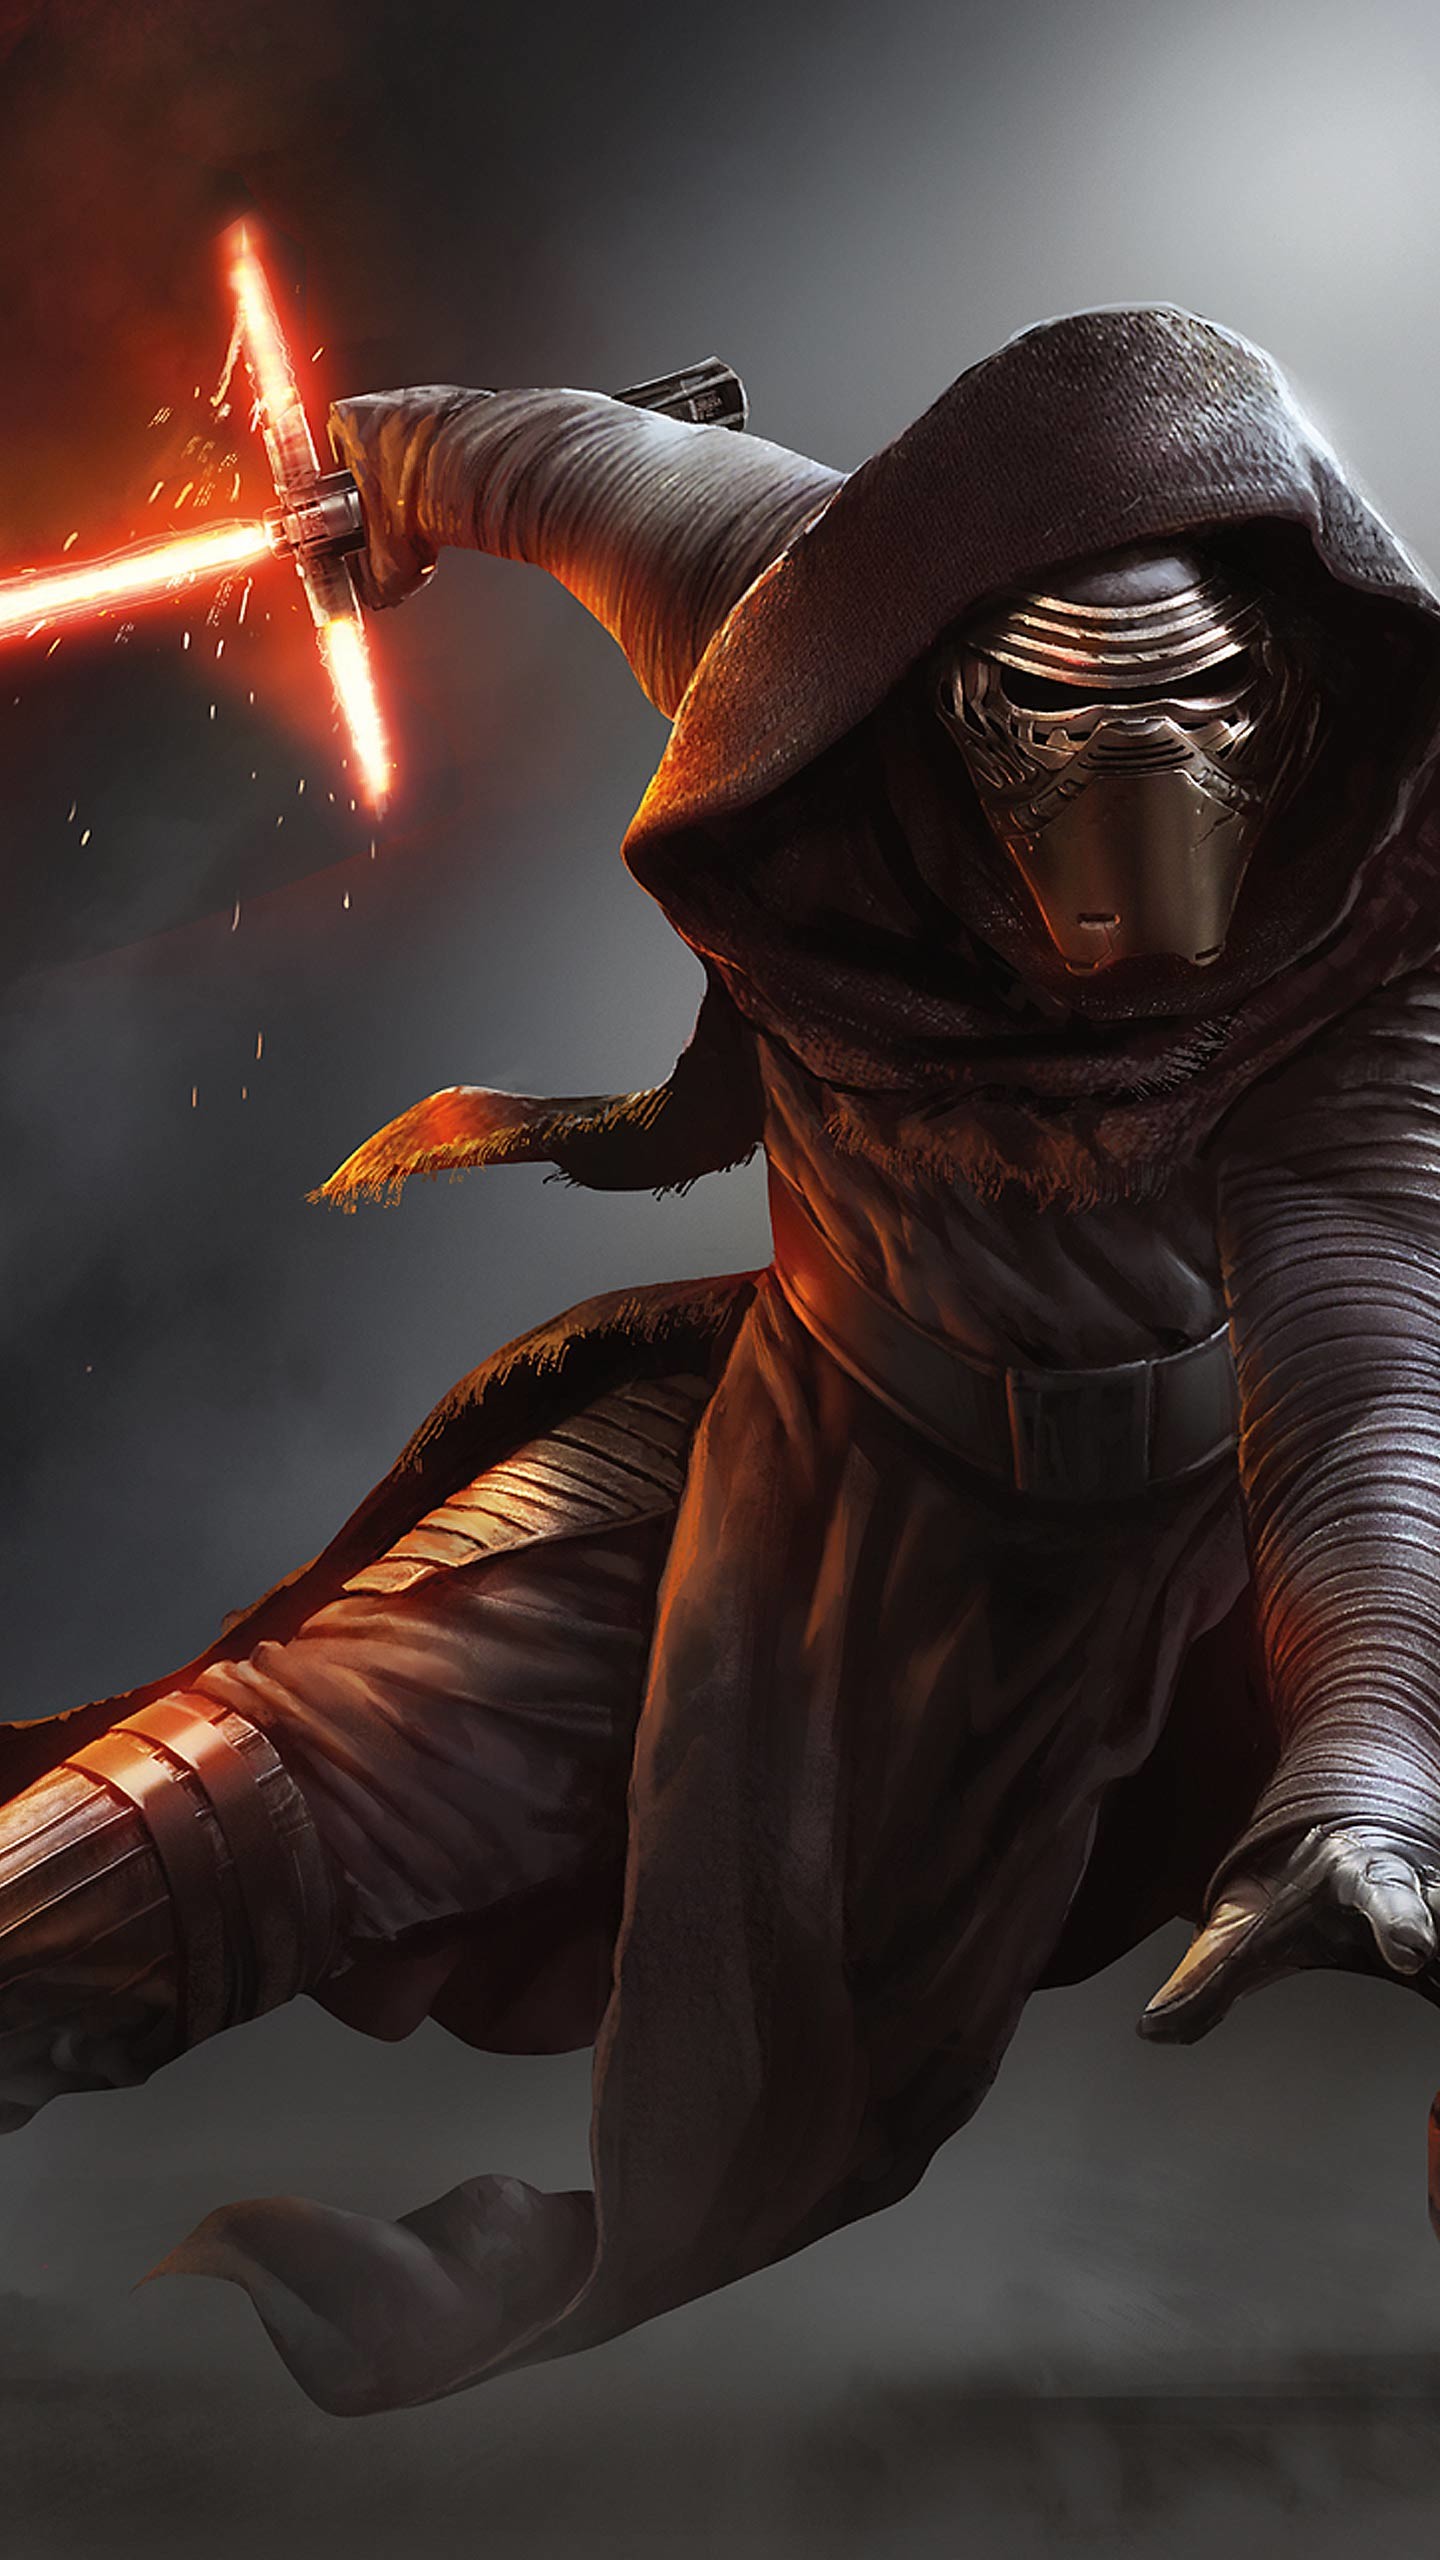 1440x2560 Star Wars: The Force Awakens wallpapers for your iPhone 6s and Galaxy S6